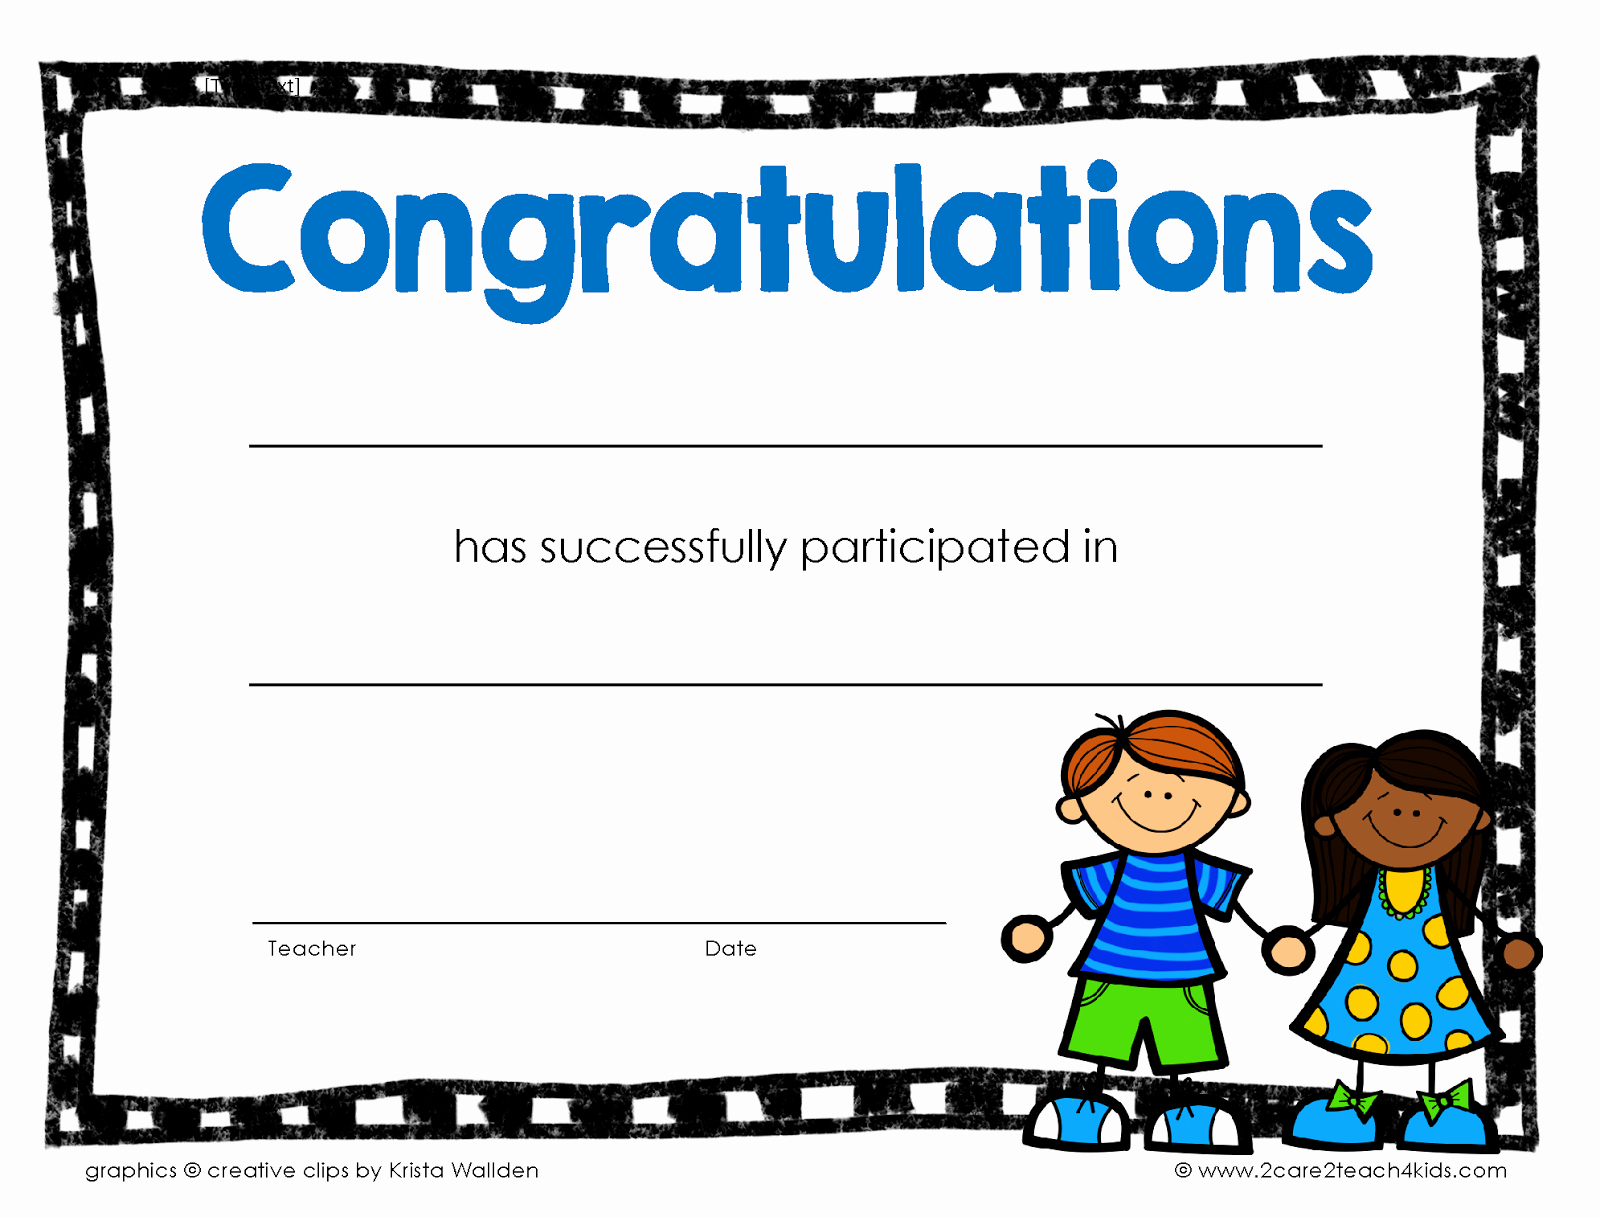 Certificate Of Participation for Kids Beautiful 2care2teach4kids the End Of Year is Ing Near Time